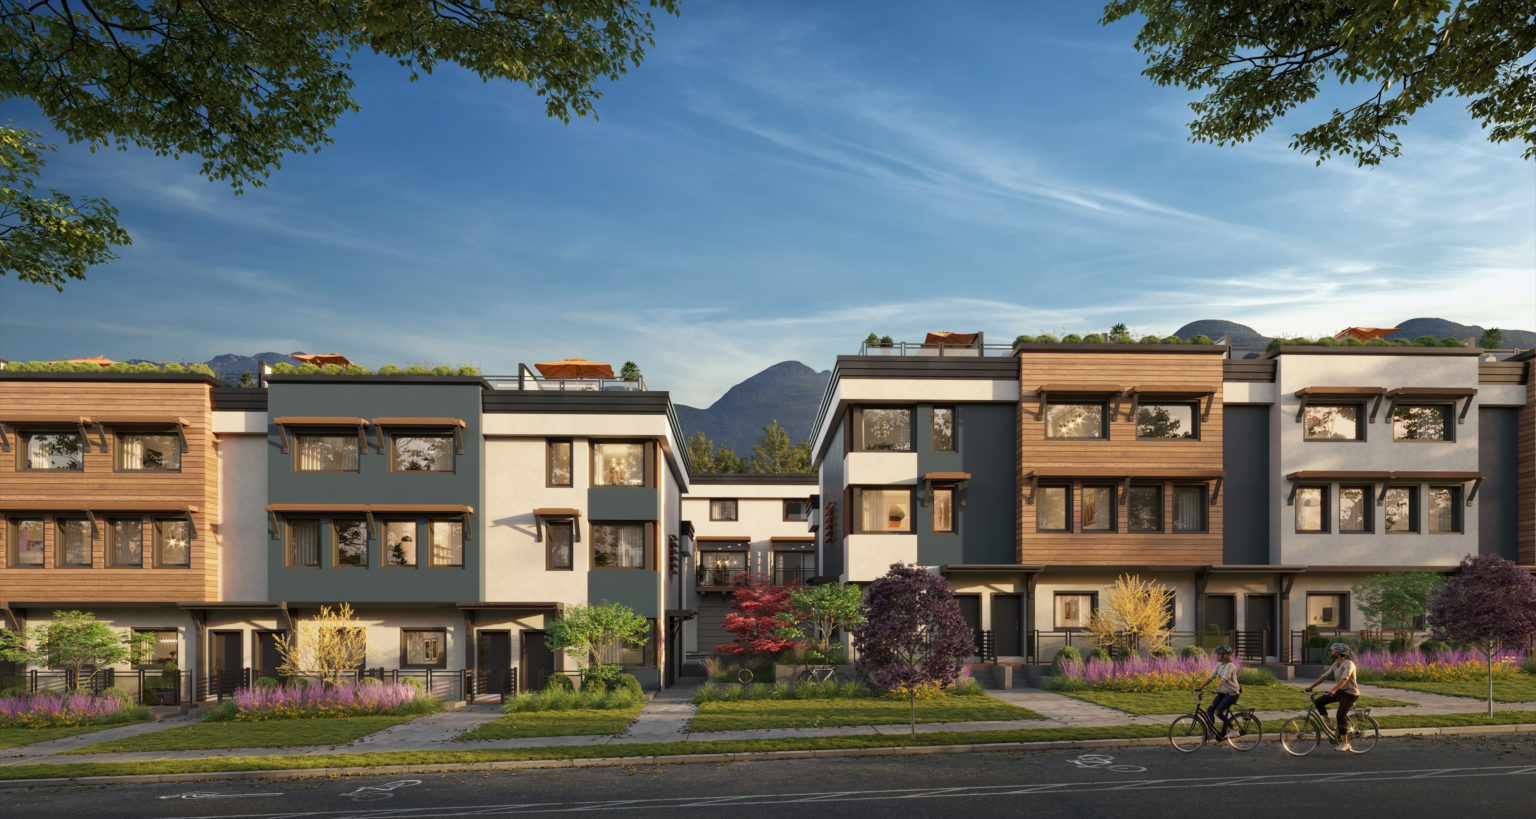 A new collection of 27 passive house townhomes coming soon to Moodyville.